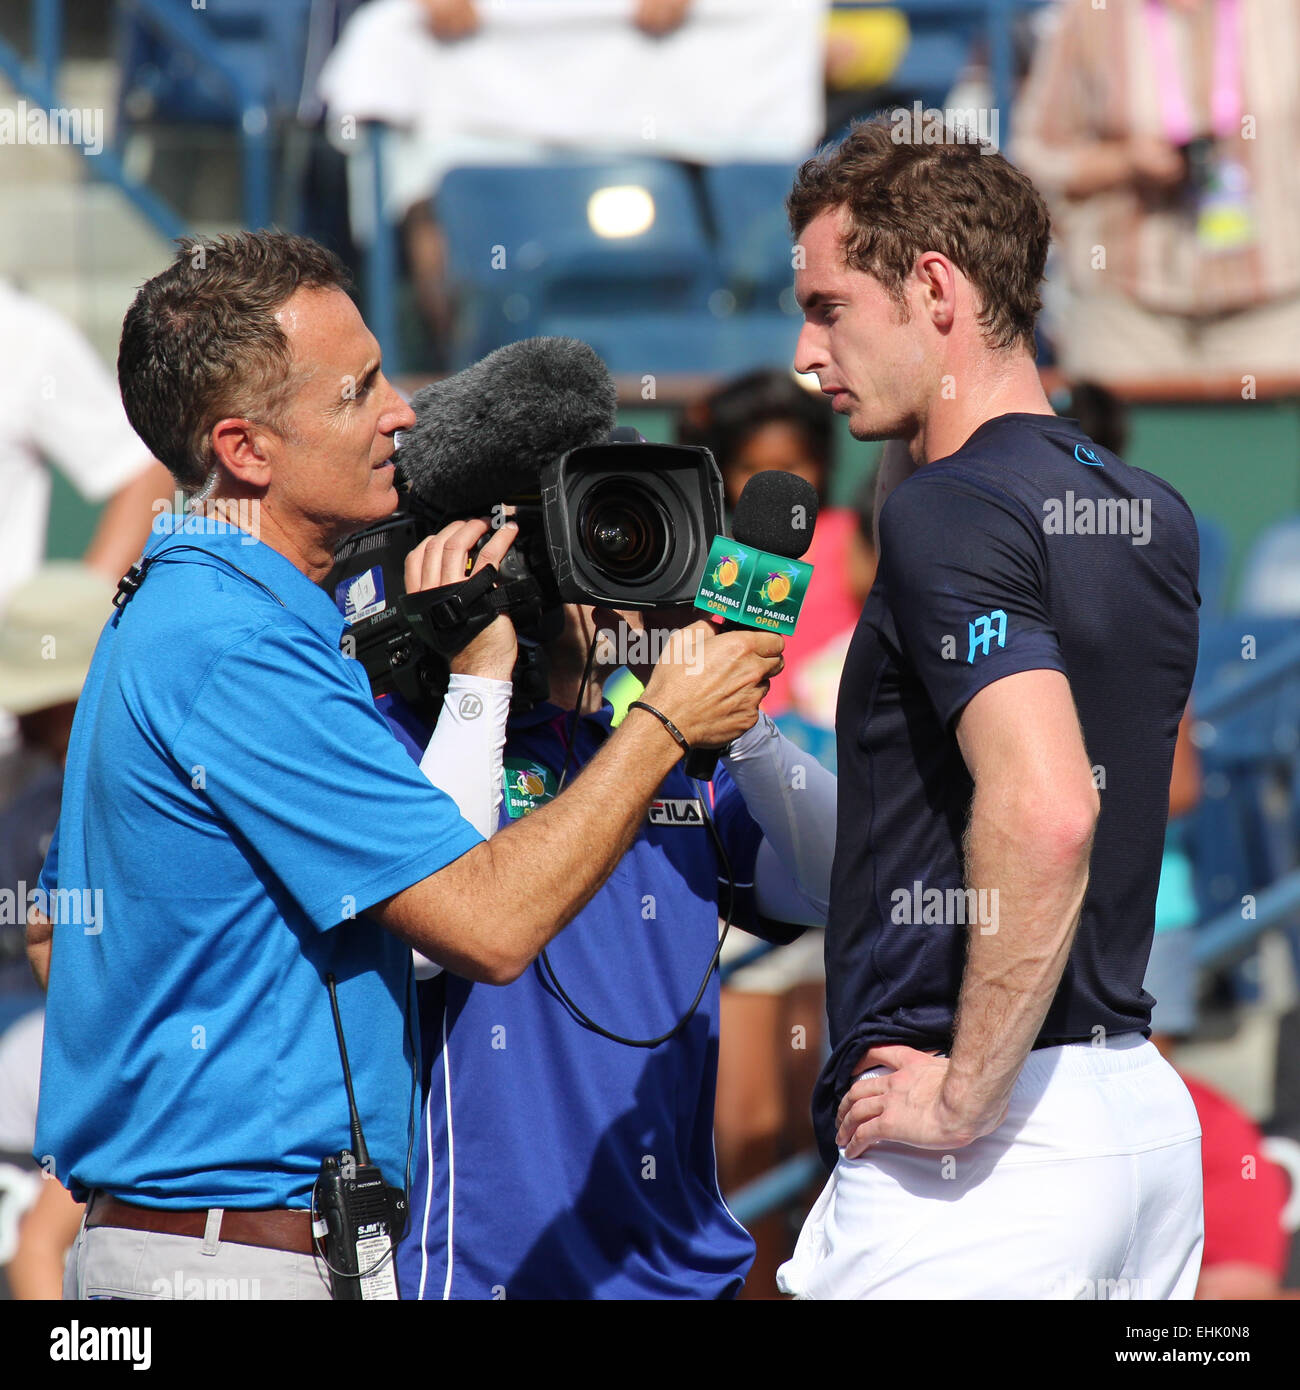 Indian Wells, California 14th March, 2015  British tennis player Andy Murray defeats Vasek Pospisil of Canada in the Men's Singles 2nd Round (score 6-1 6-3). Credit: Werner Fotos/Alamy Live News Stock Photo